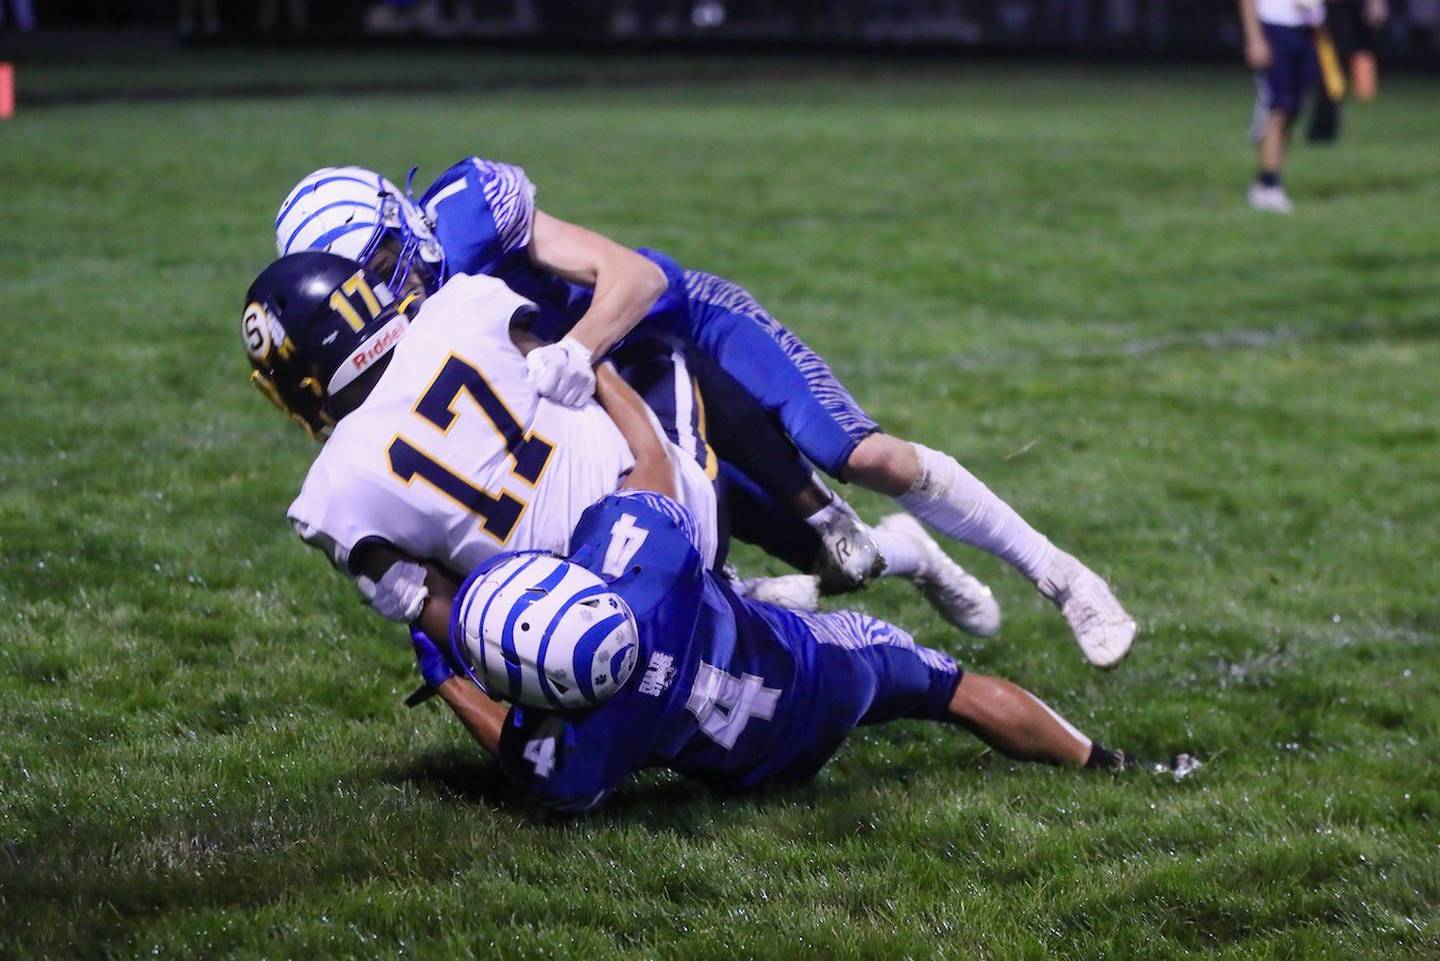 Princeton's Andrew Peacock (4) and Gavin Lanham (7) bring down Sterling's Kaedon Phillips Friday night at Bryant Field. The Tigers won 28-6.